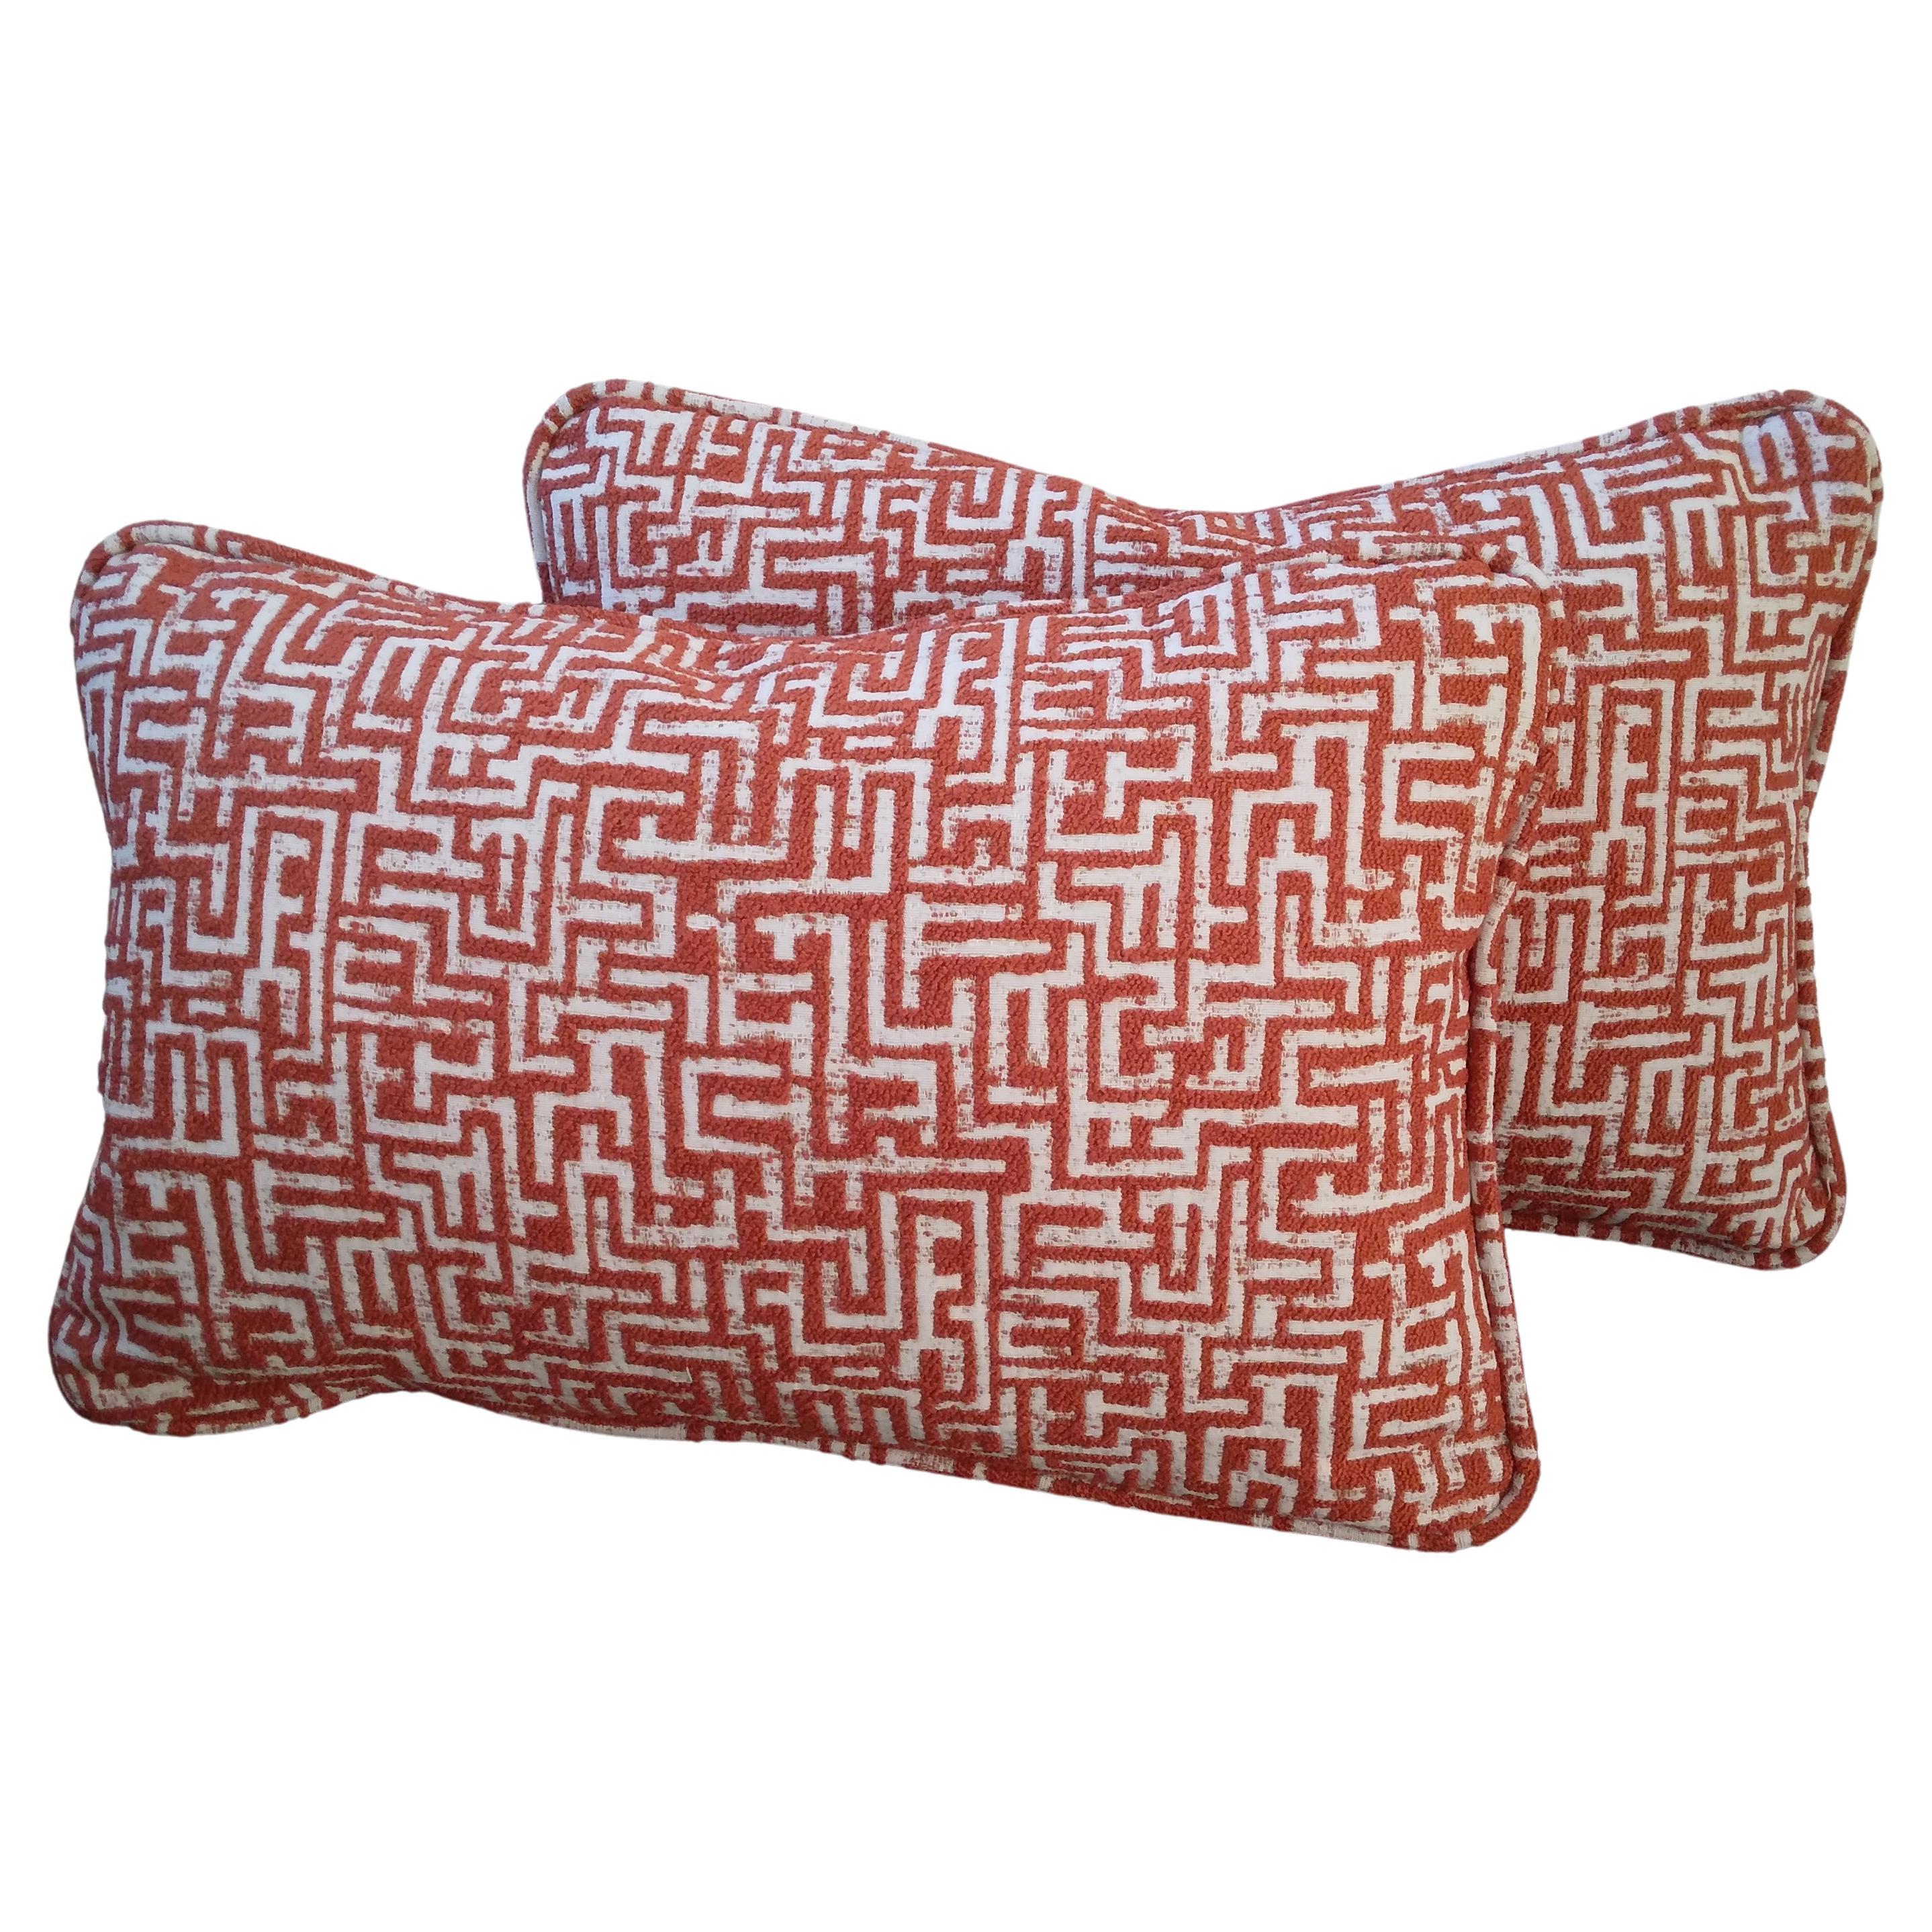 Kuba-inspired Geometric Jacquard Accent Pillows in Orange and White - a pair 